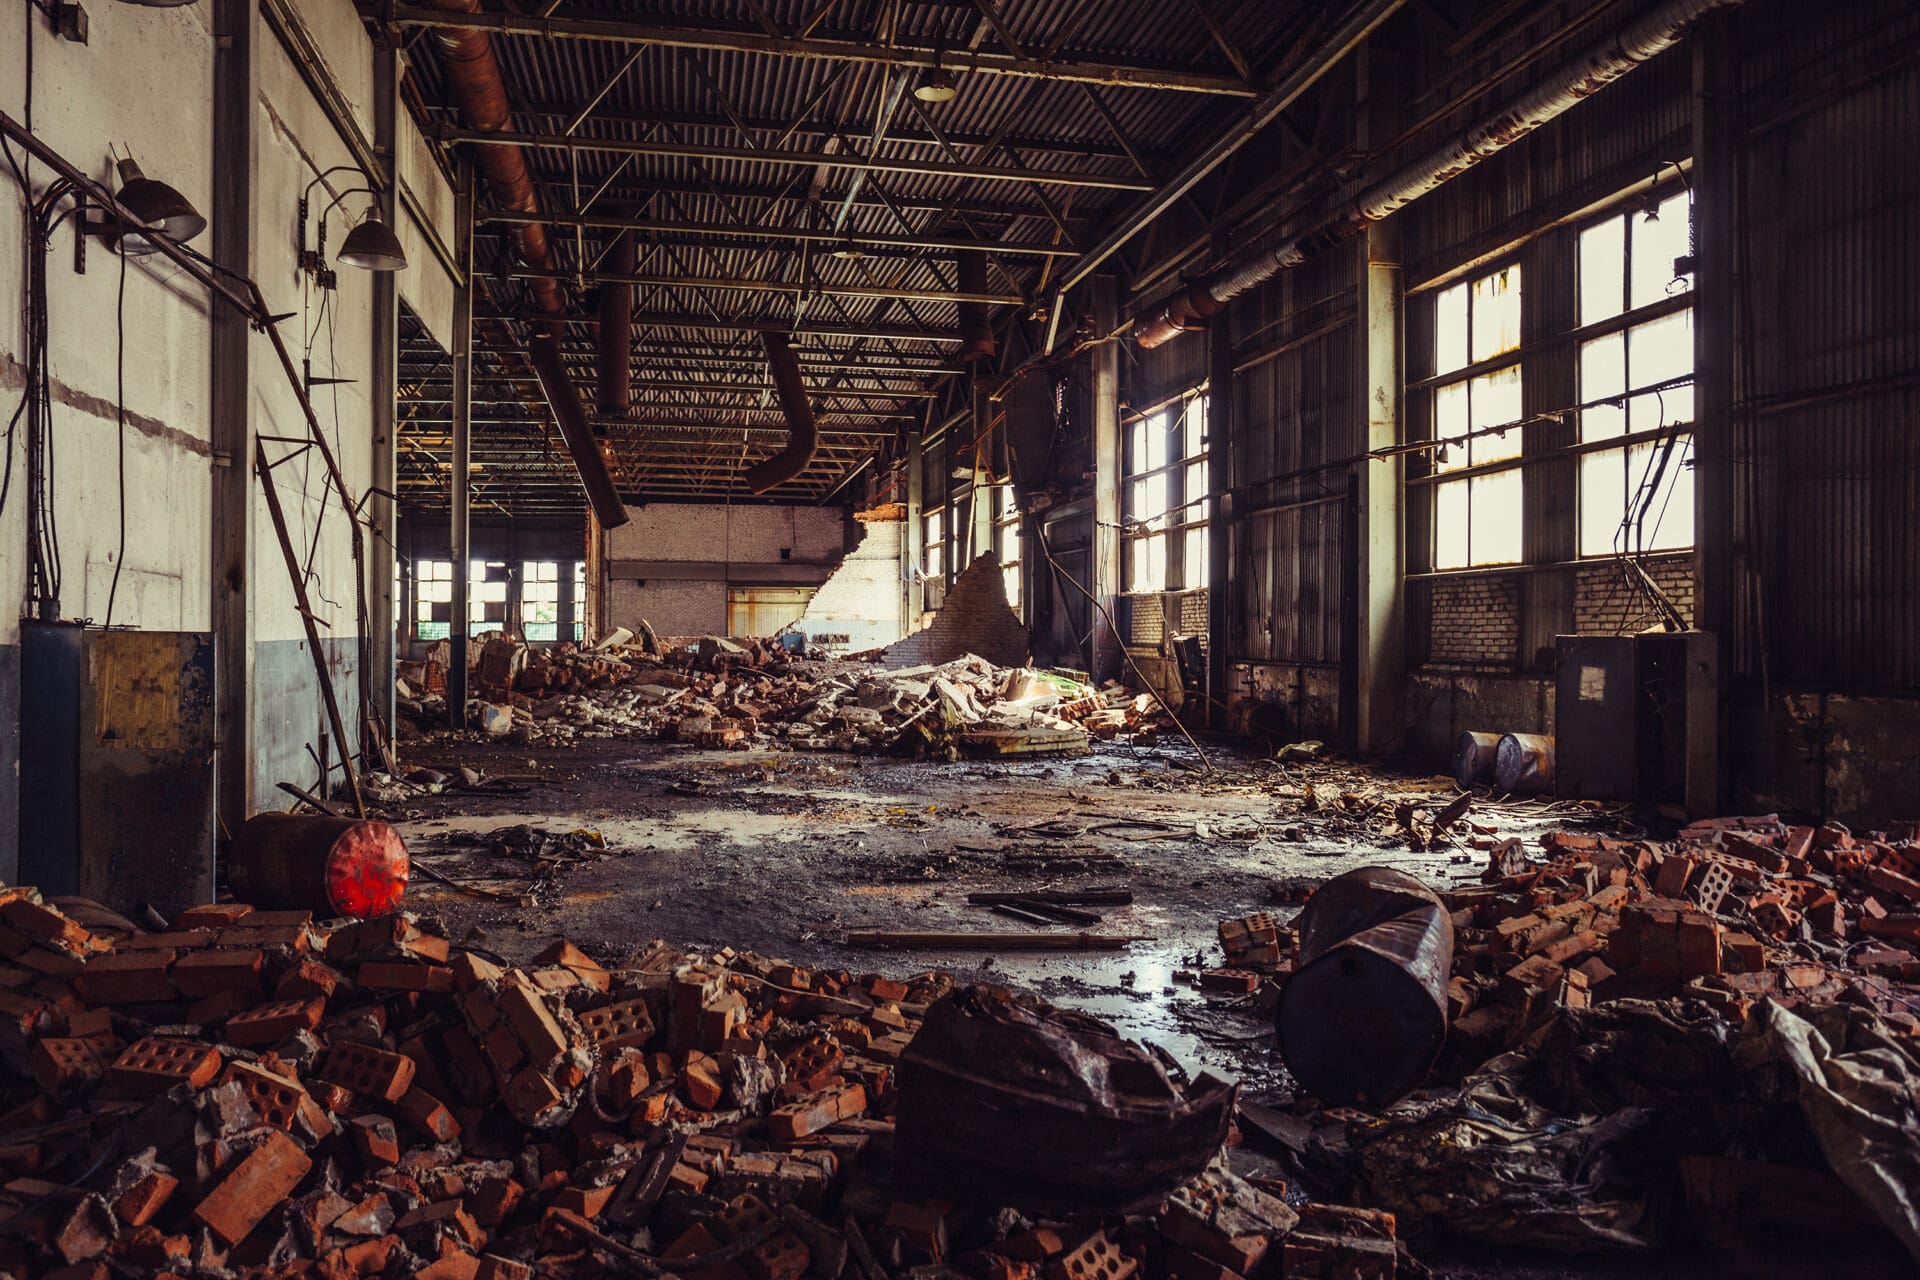 A warehouse filled with lots of debris and trash.